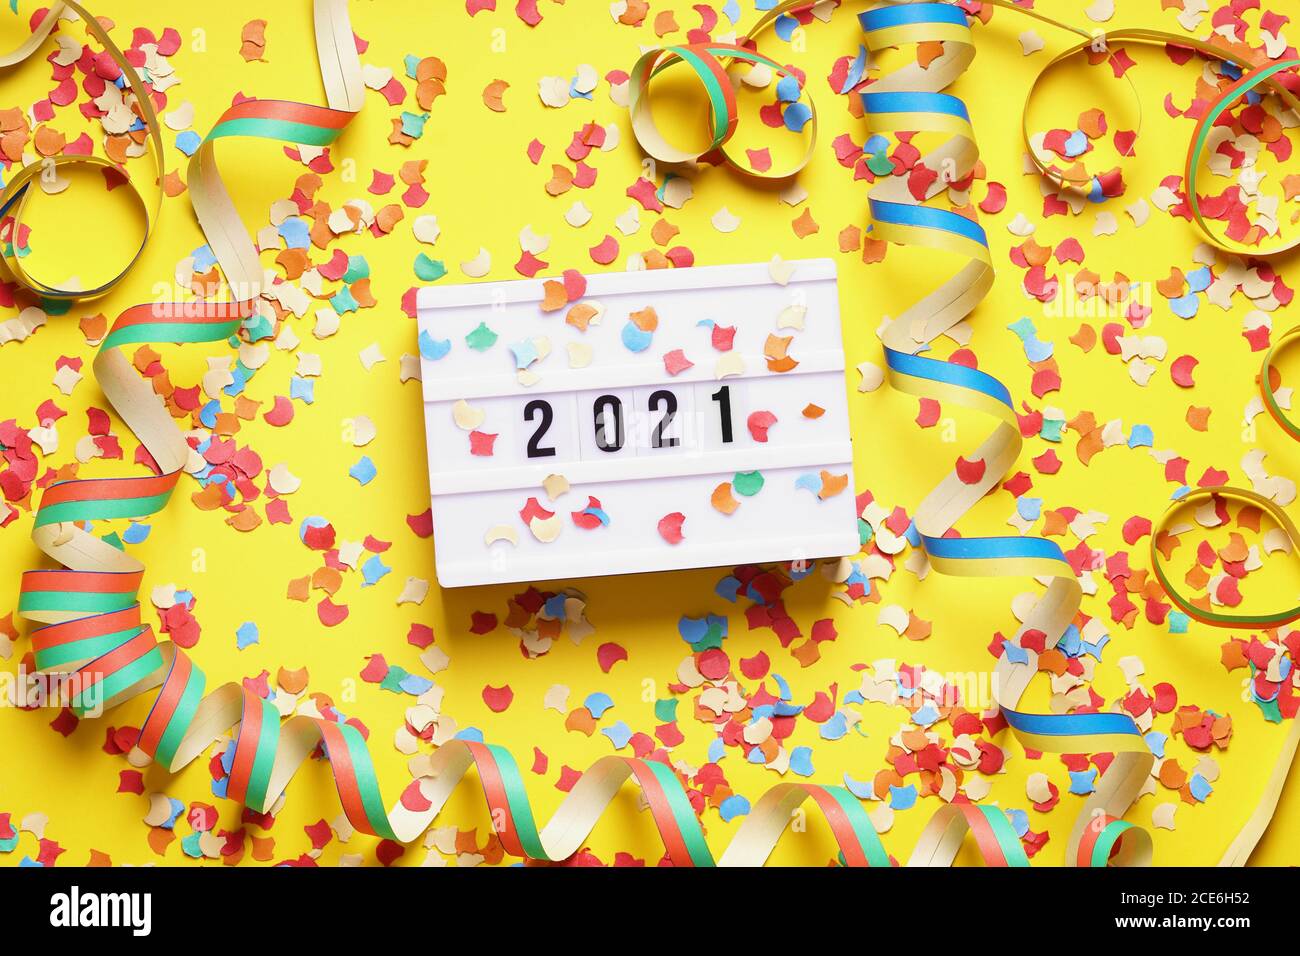 2021 new year celebration flat lay concept with confetti and streamers Stock Photo